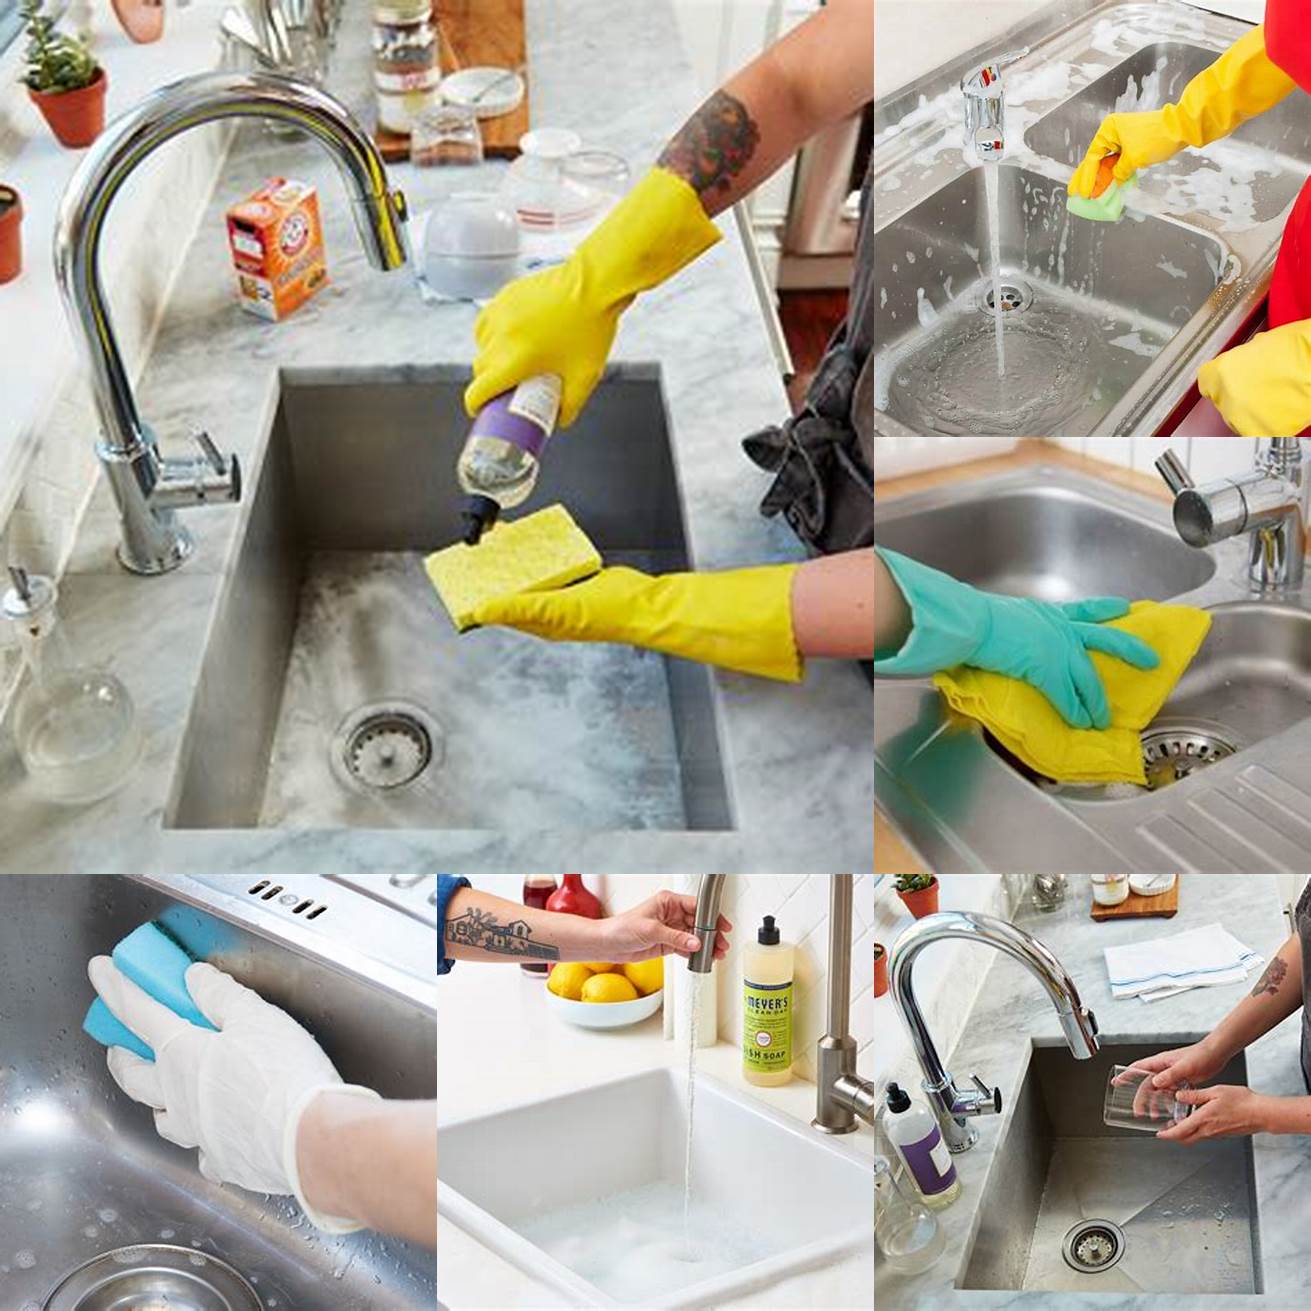 Use a mild detergent and warm water to clean your kitchen sink cabinet regularly